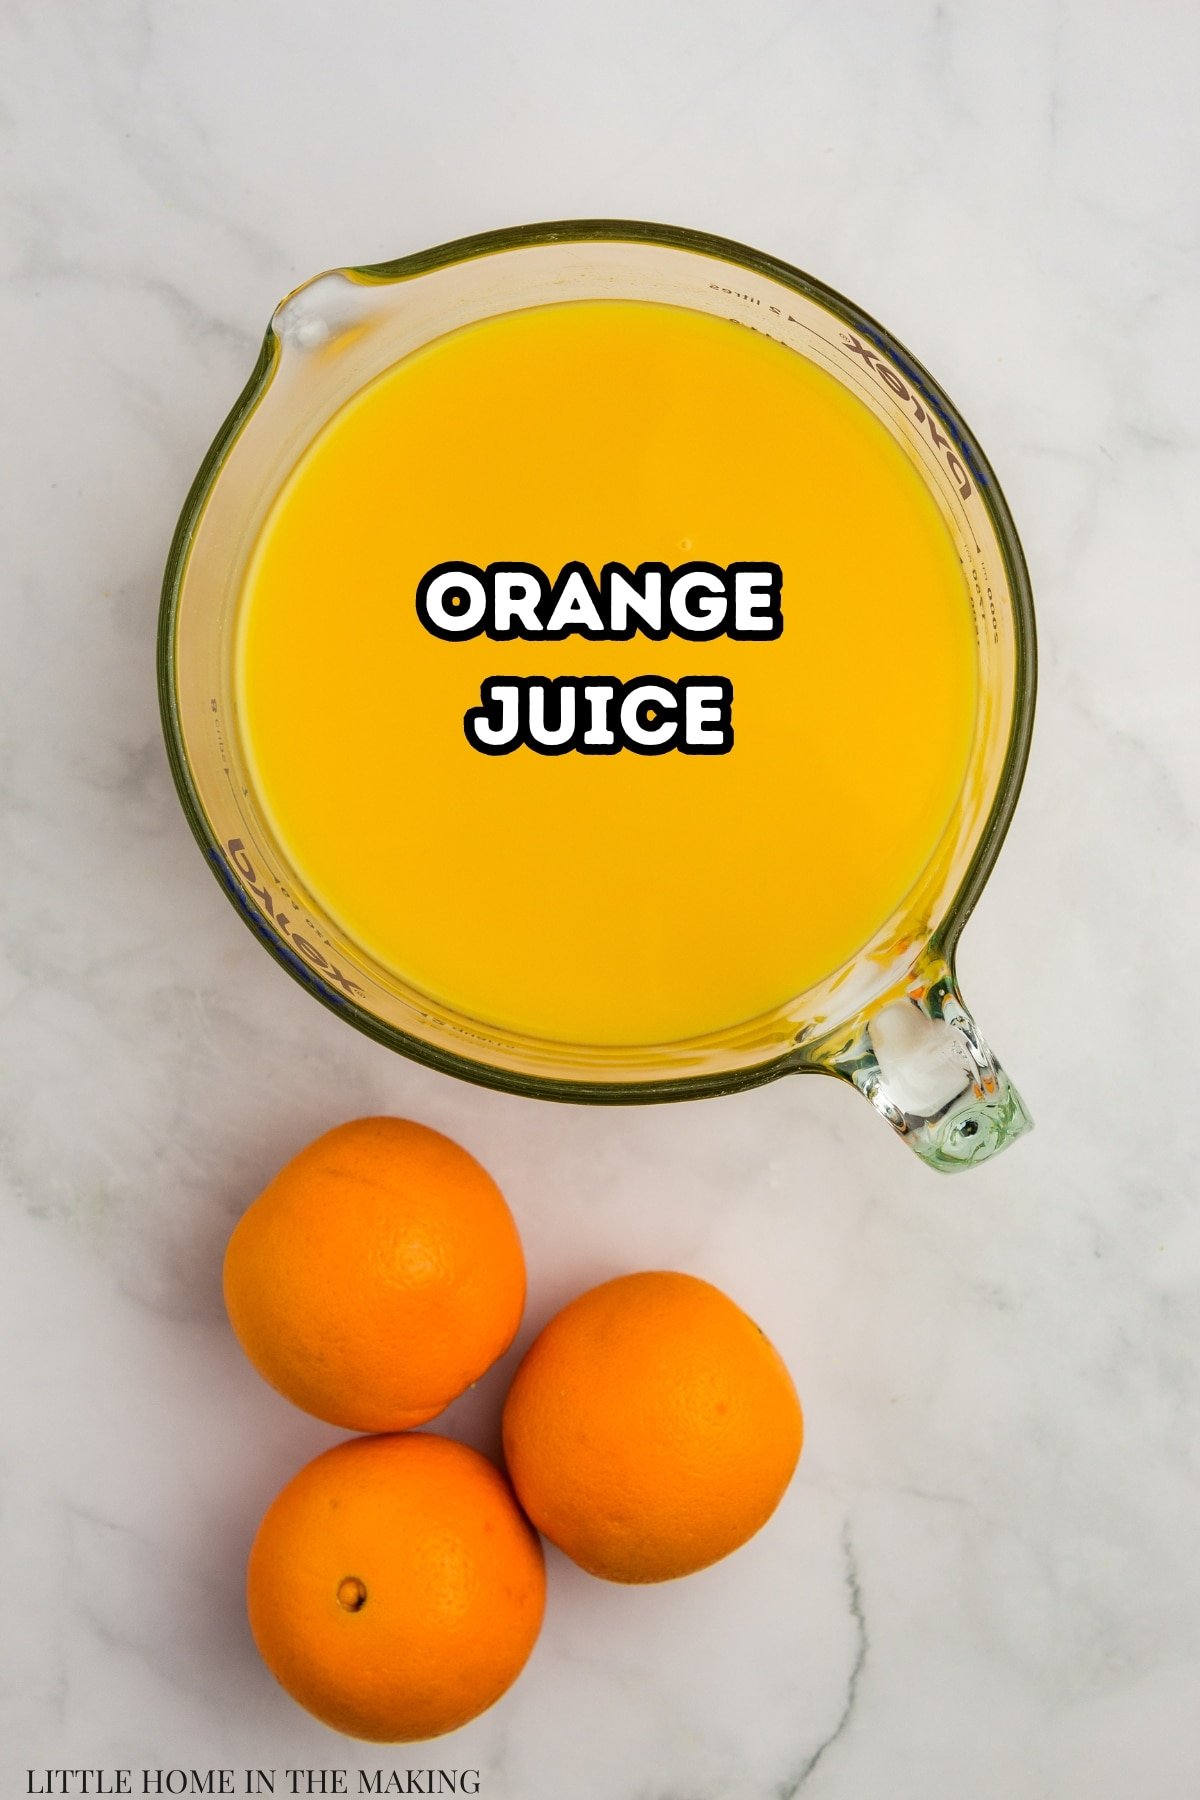 A large measuring cup of orange juice, with 3 oranges next to it on the counter.